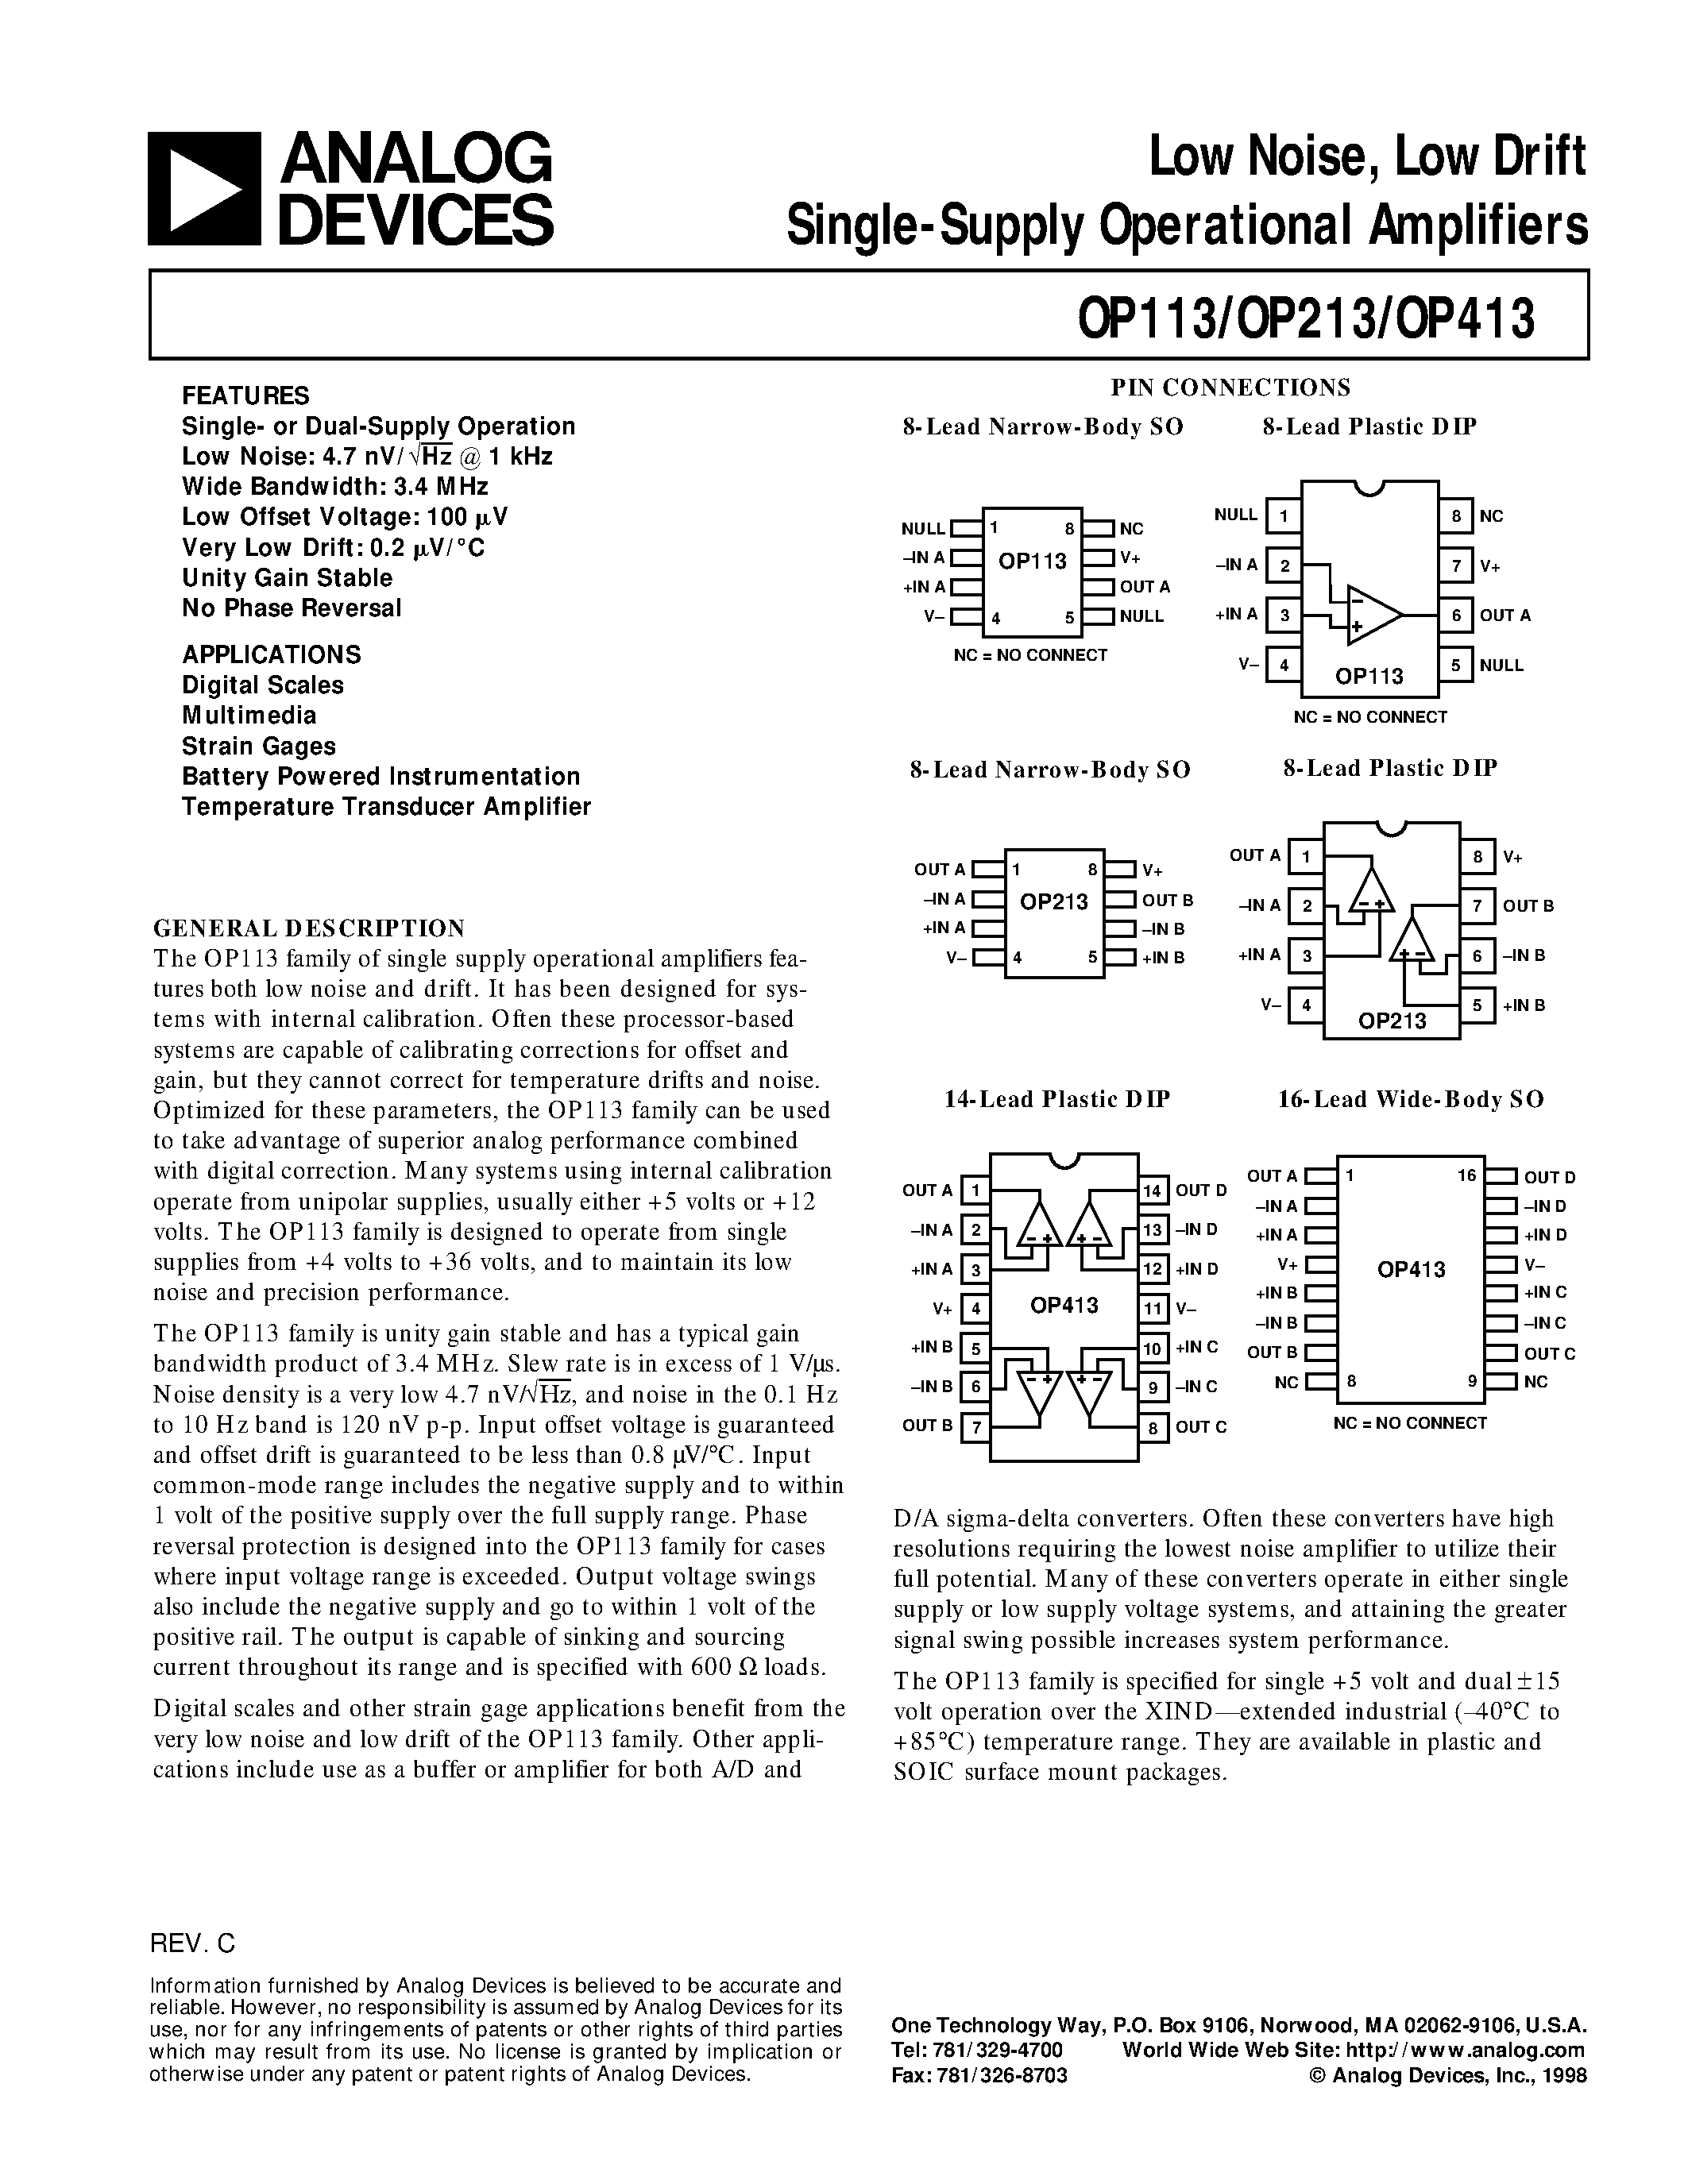 Даташит OP213 - Low Noise / Low Drift Single-Supply Operational Amplifiers страница 1